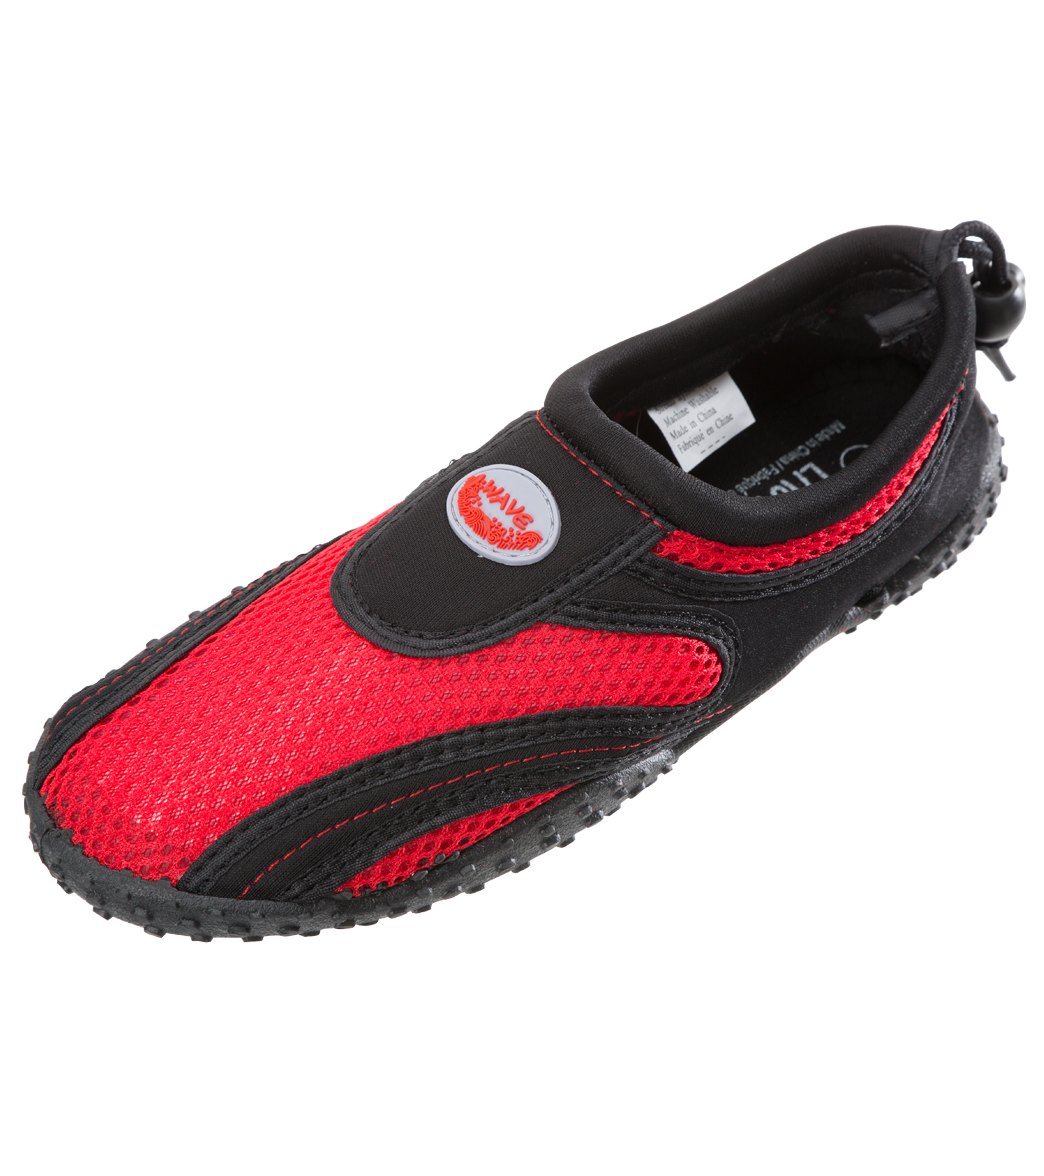 Easy Usa Women's Wave Water Shoes - Black/Red 6 - Swimoutlet.com